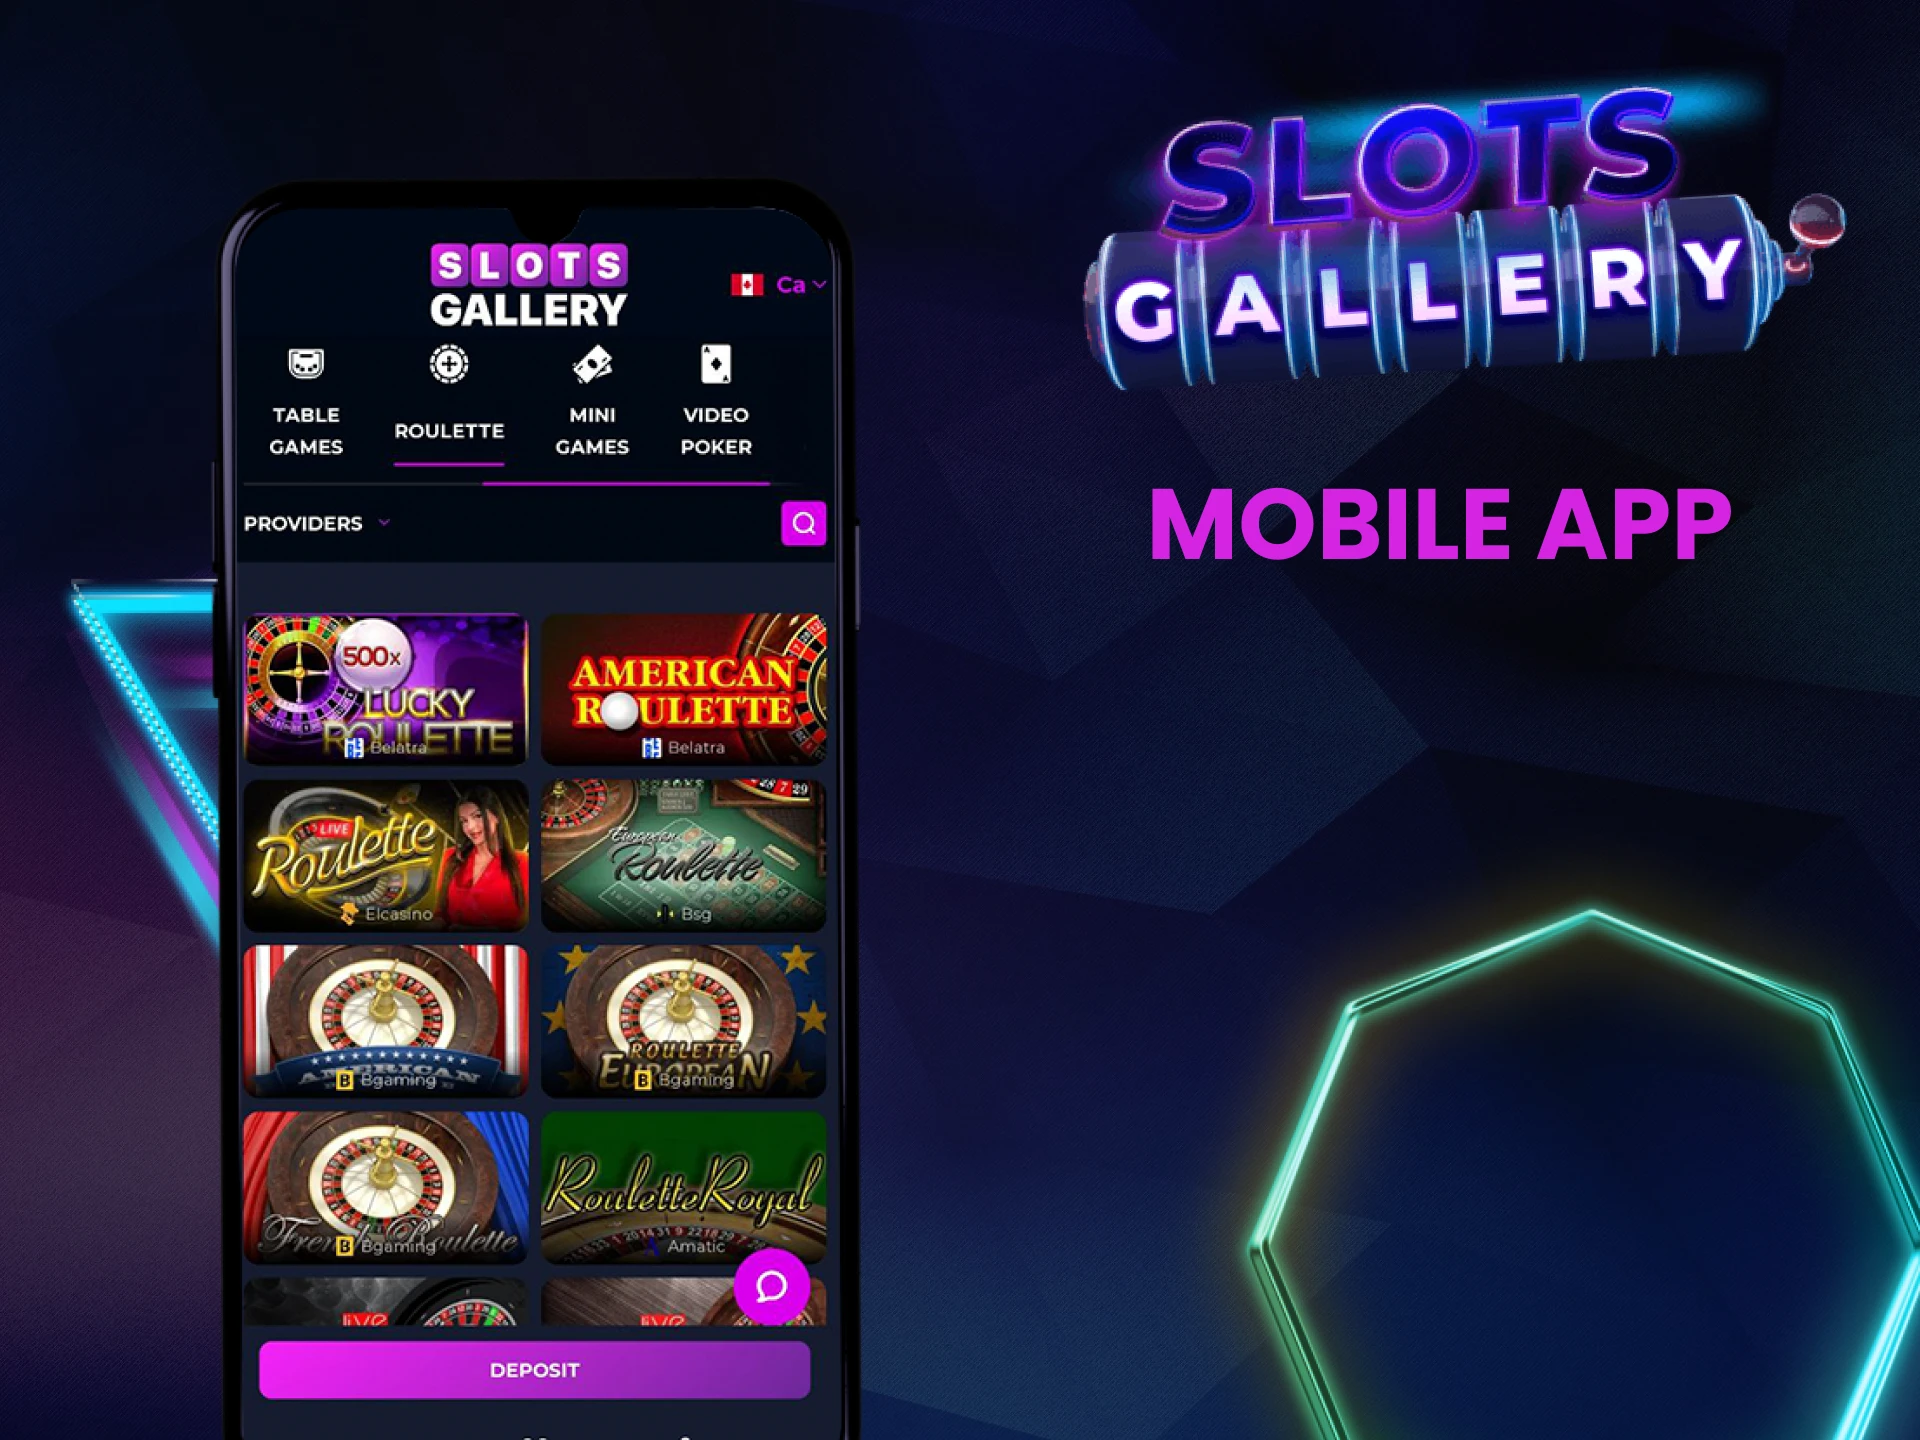 Play roulette through the Slots Gallery app.